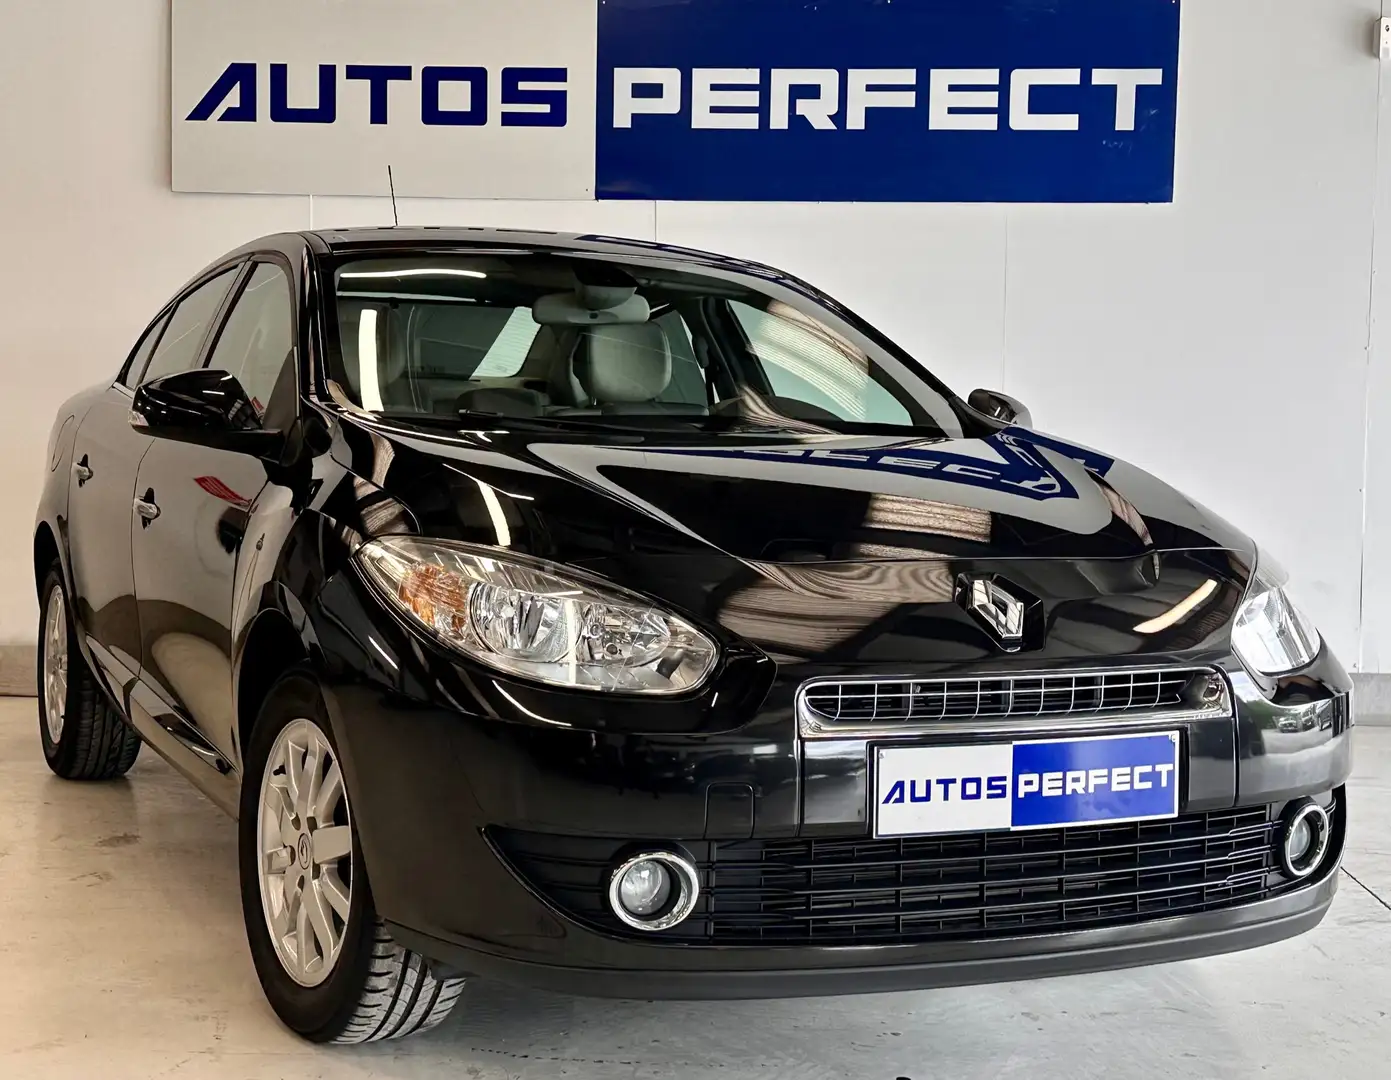 Renault Fluence 1.5 dCi Dynamique 78KW CRUISE AIRCO NAVI PDC Siyah - 2